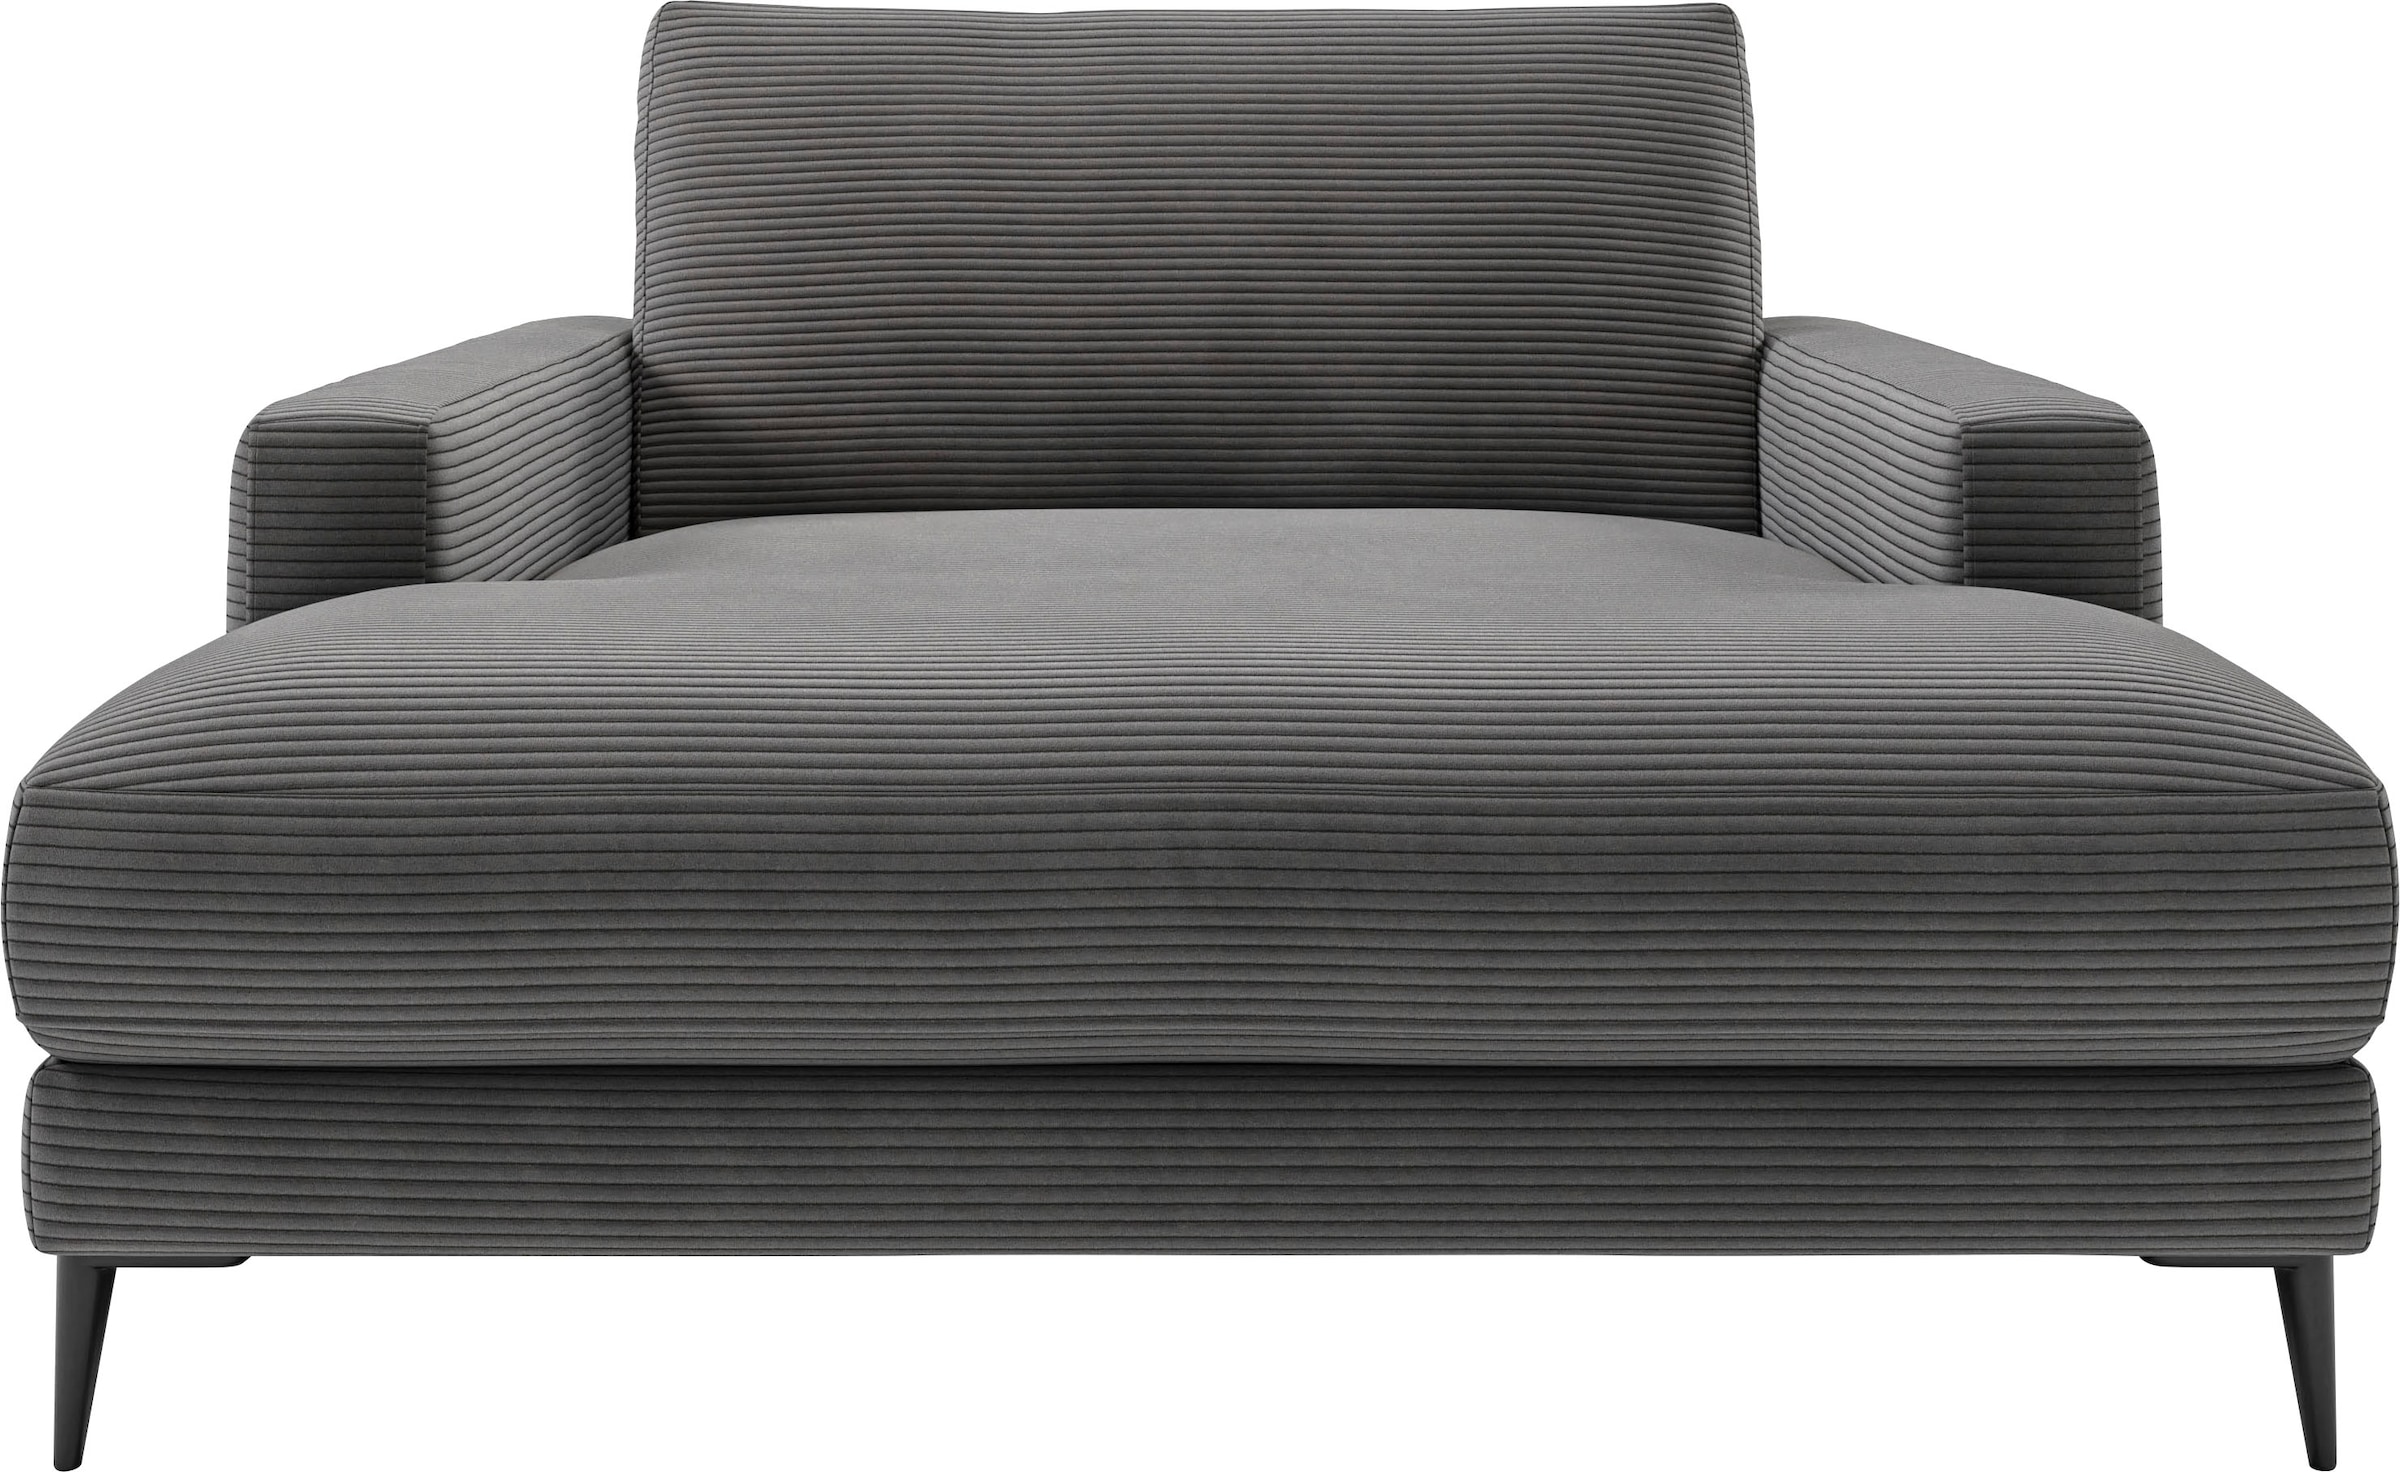 INOSIGN Chaiselongue "Downtown Loungemöbel zum Relaxen, B/T/H: 132/170/84 cm", auch in Bouclé, Cord und Easy care - leic